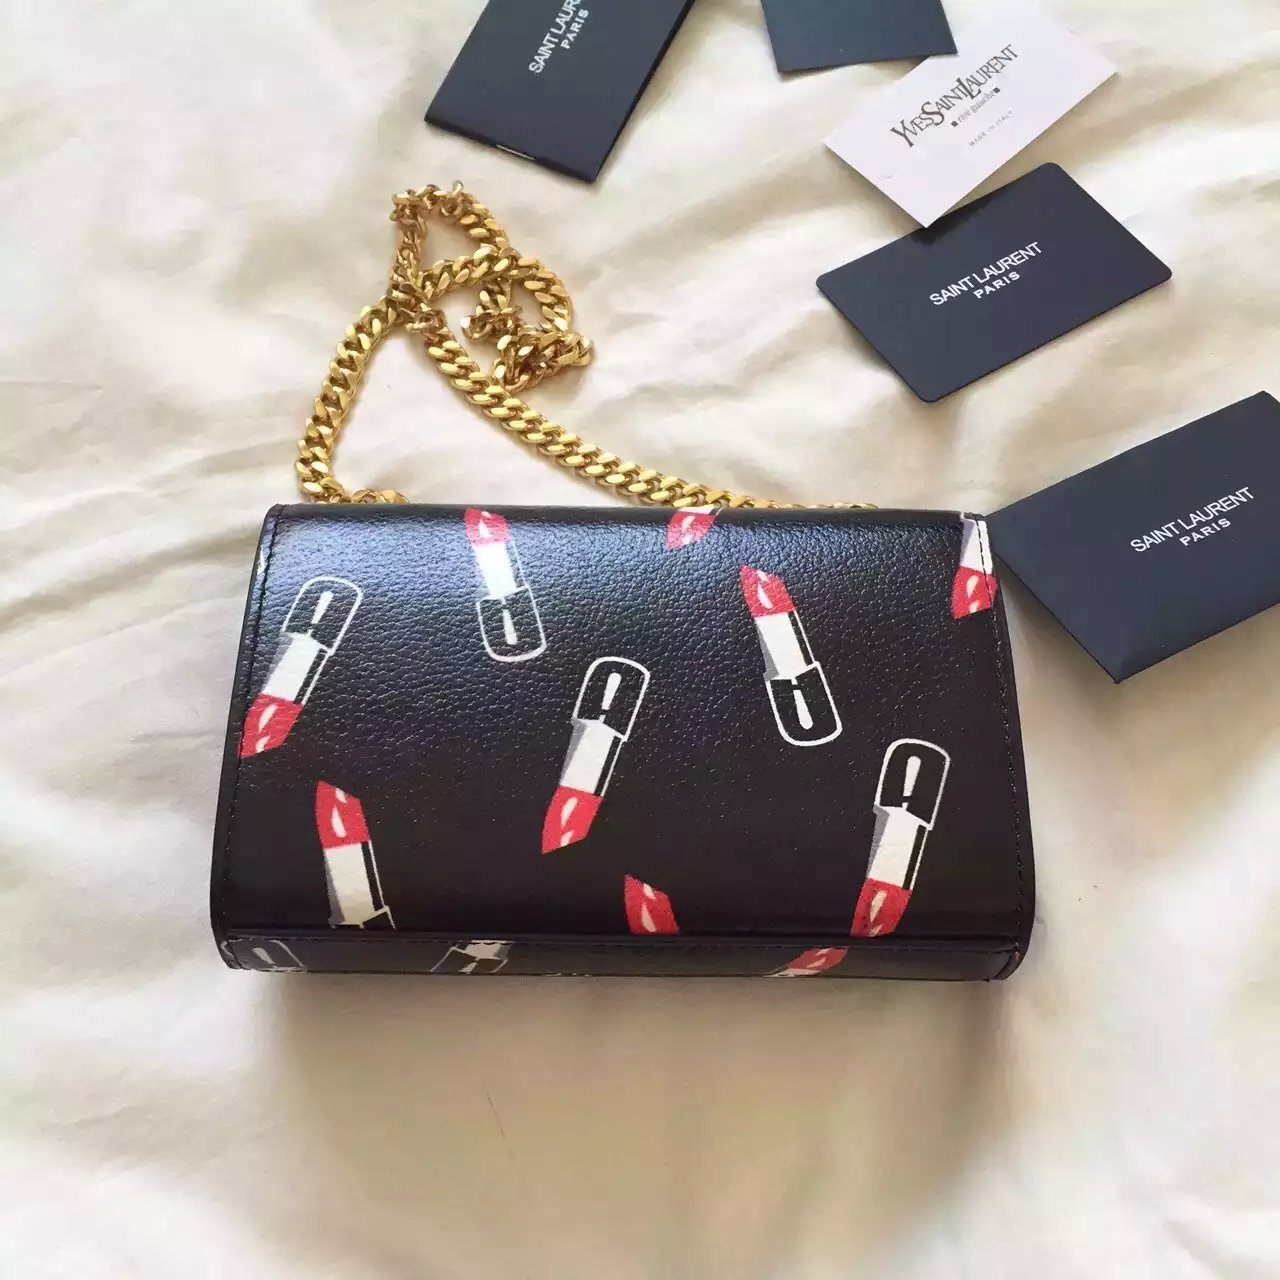 2015 New Saint Laurent Bag Cheap Sale-Saint Laurent Classic Monogram Satchel in Black,Red and White Lipstick Printed Leather - Click Image to Close